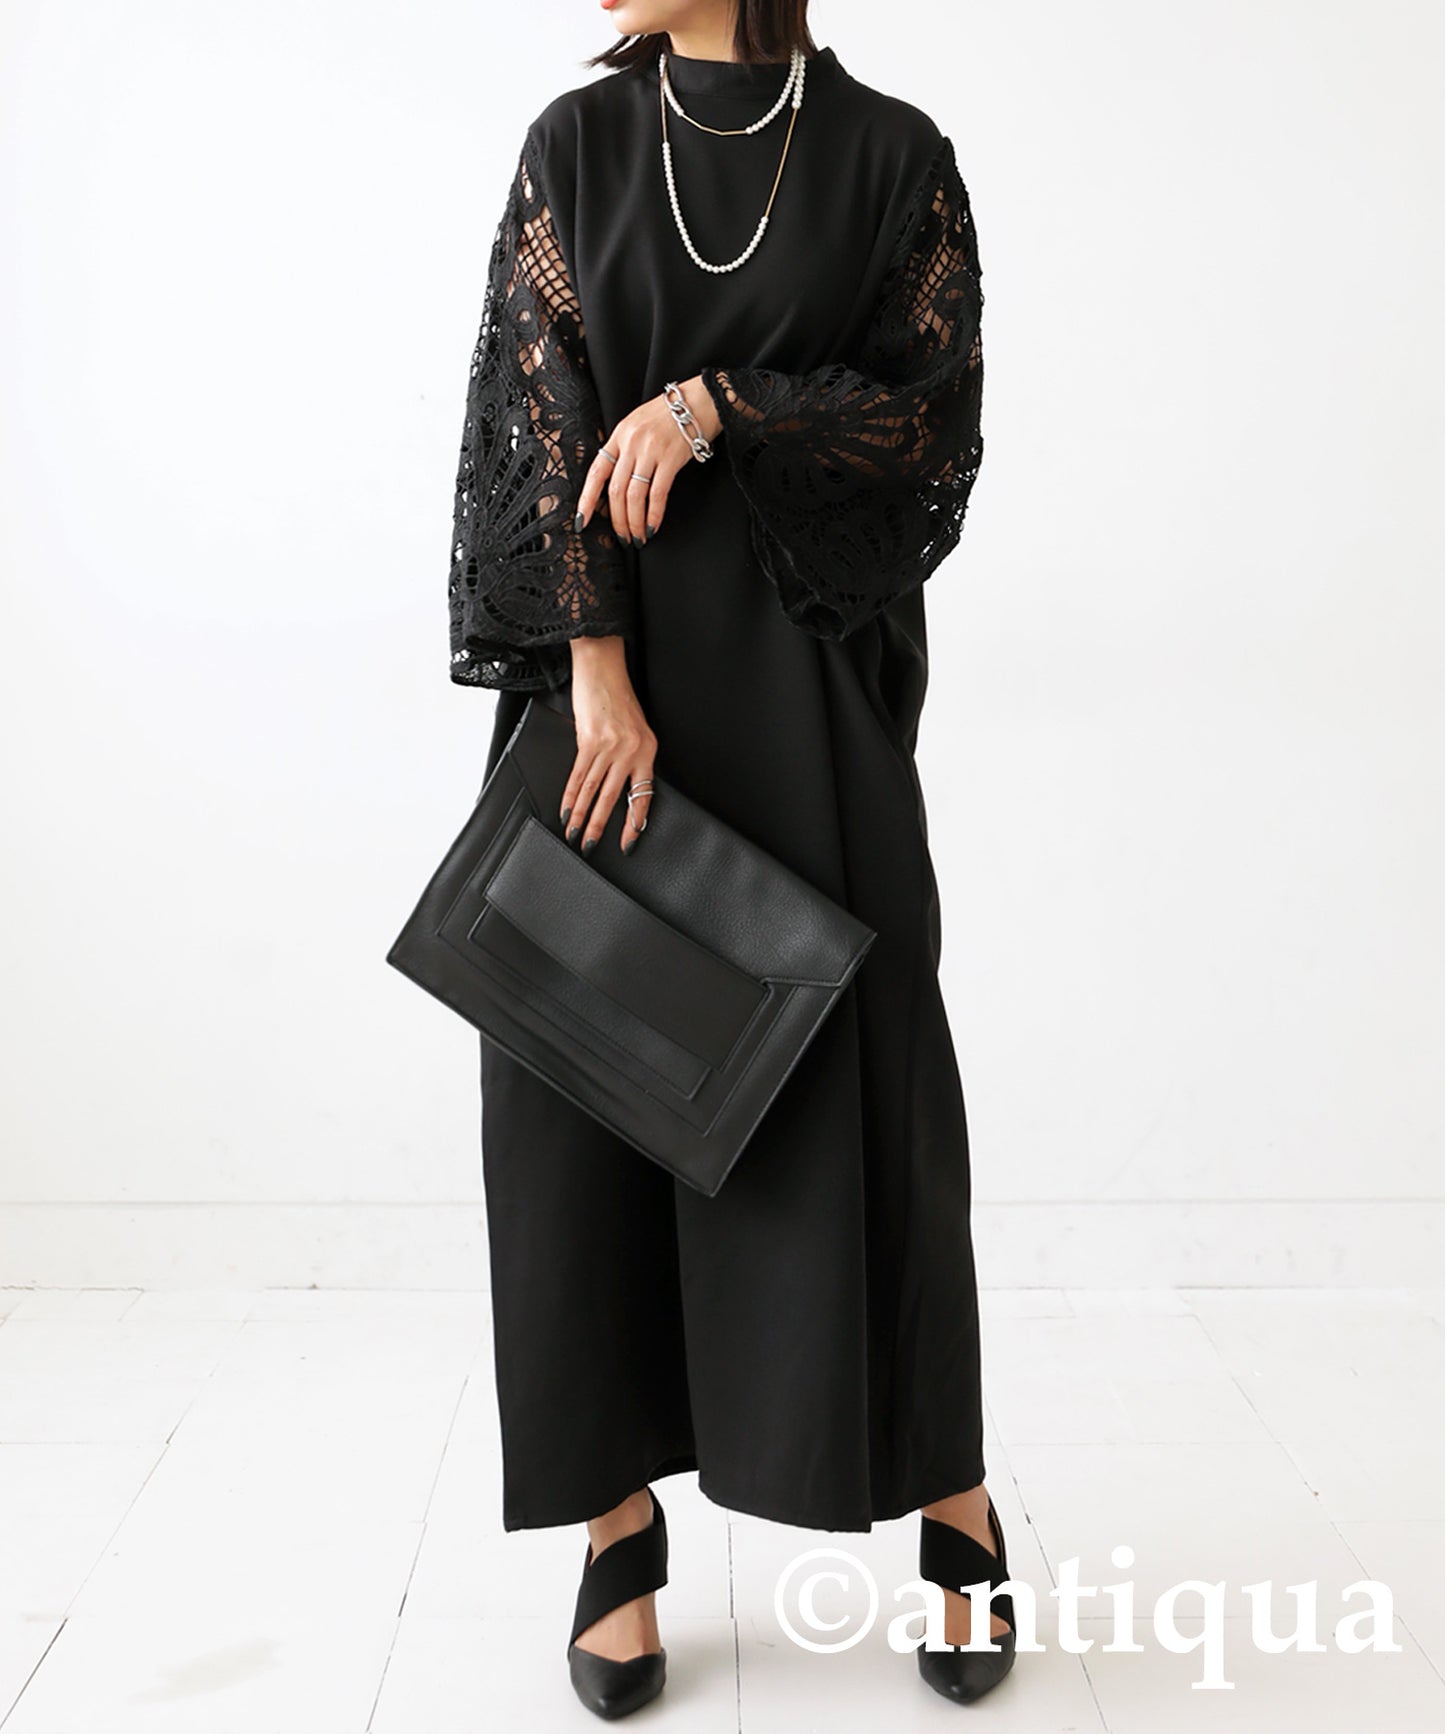 Laced Sleeve Ladies Long casual dress